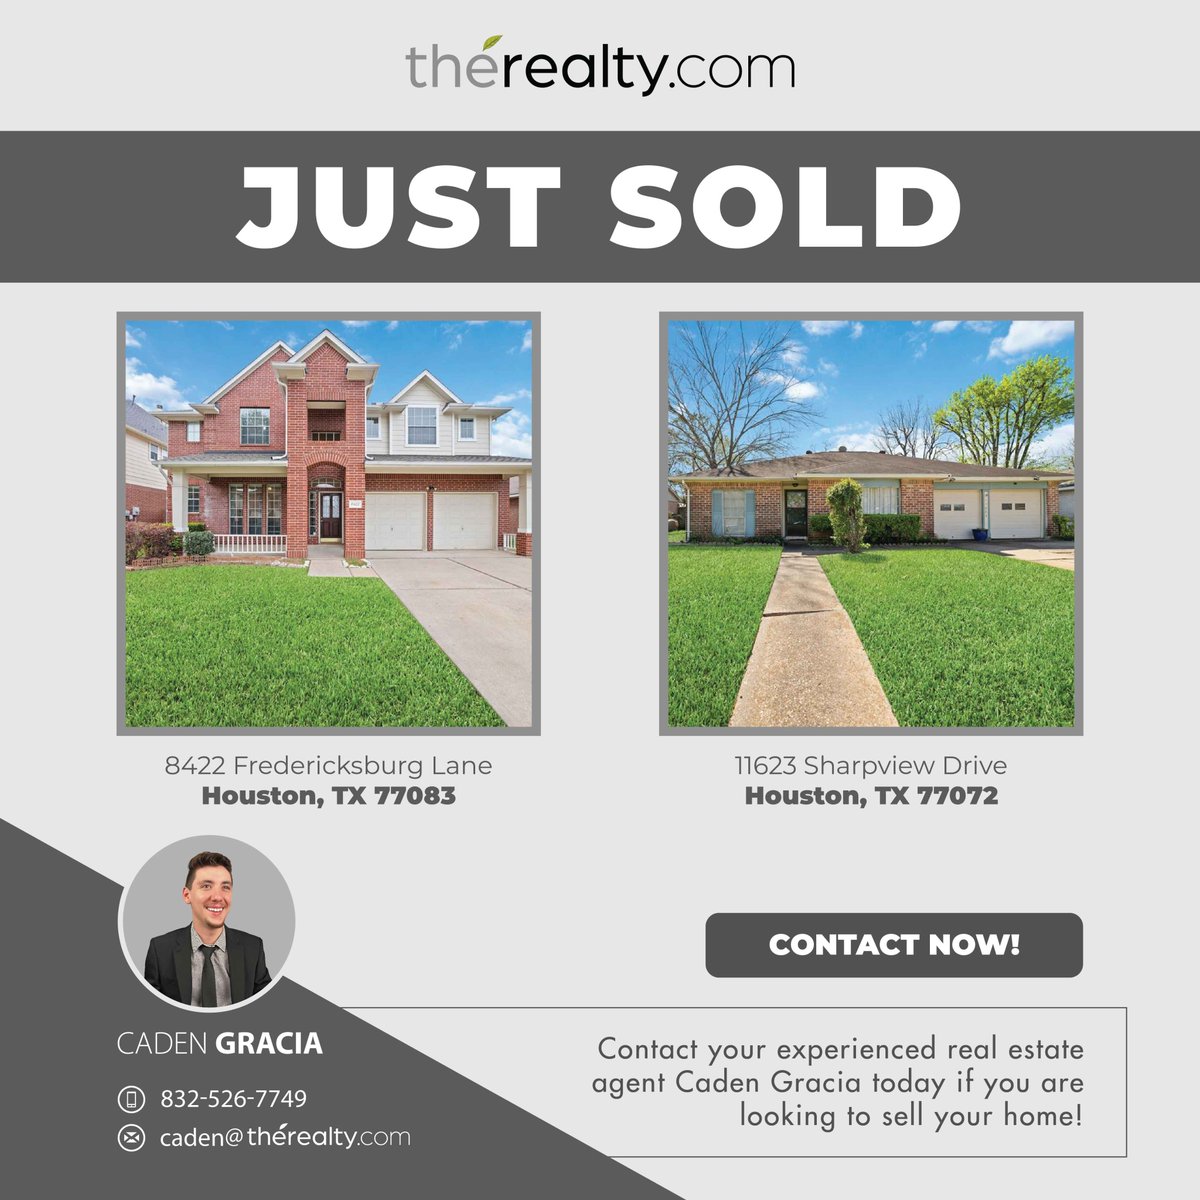 Congratulation to both sellers in Southwest Houston.  Thank you for giving us a chance to help you sell your homes. #JustSoldHome #houstonrealestate